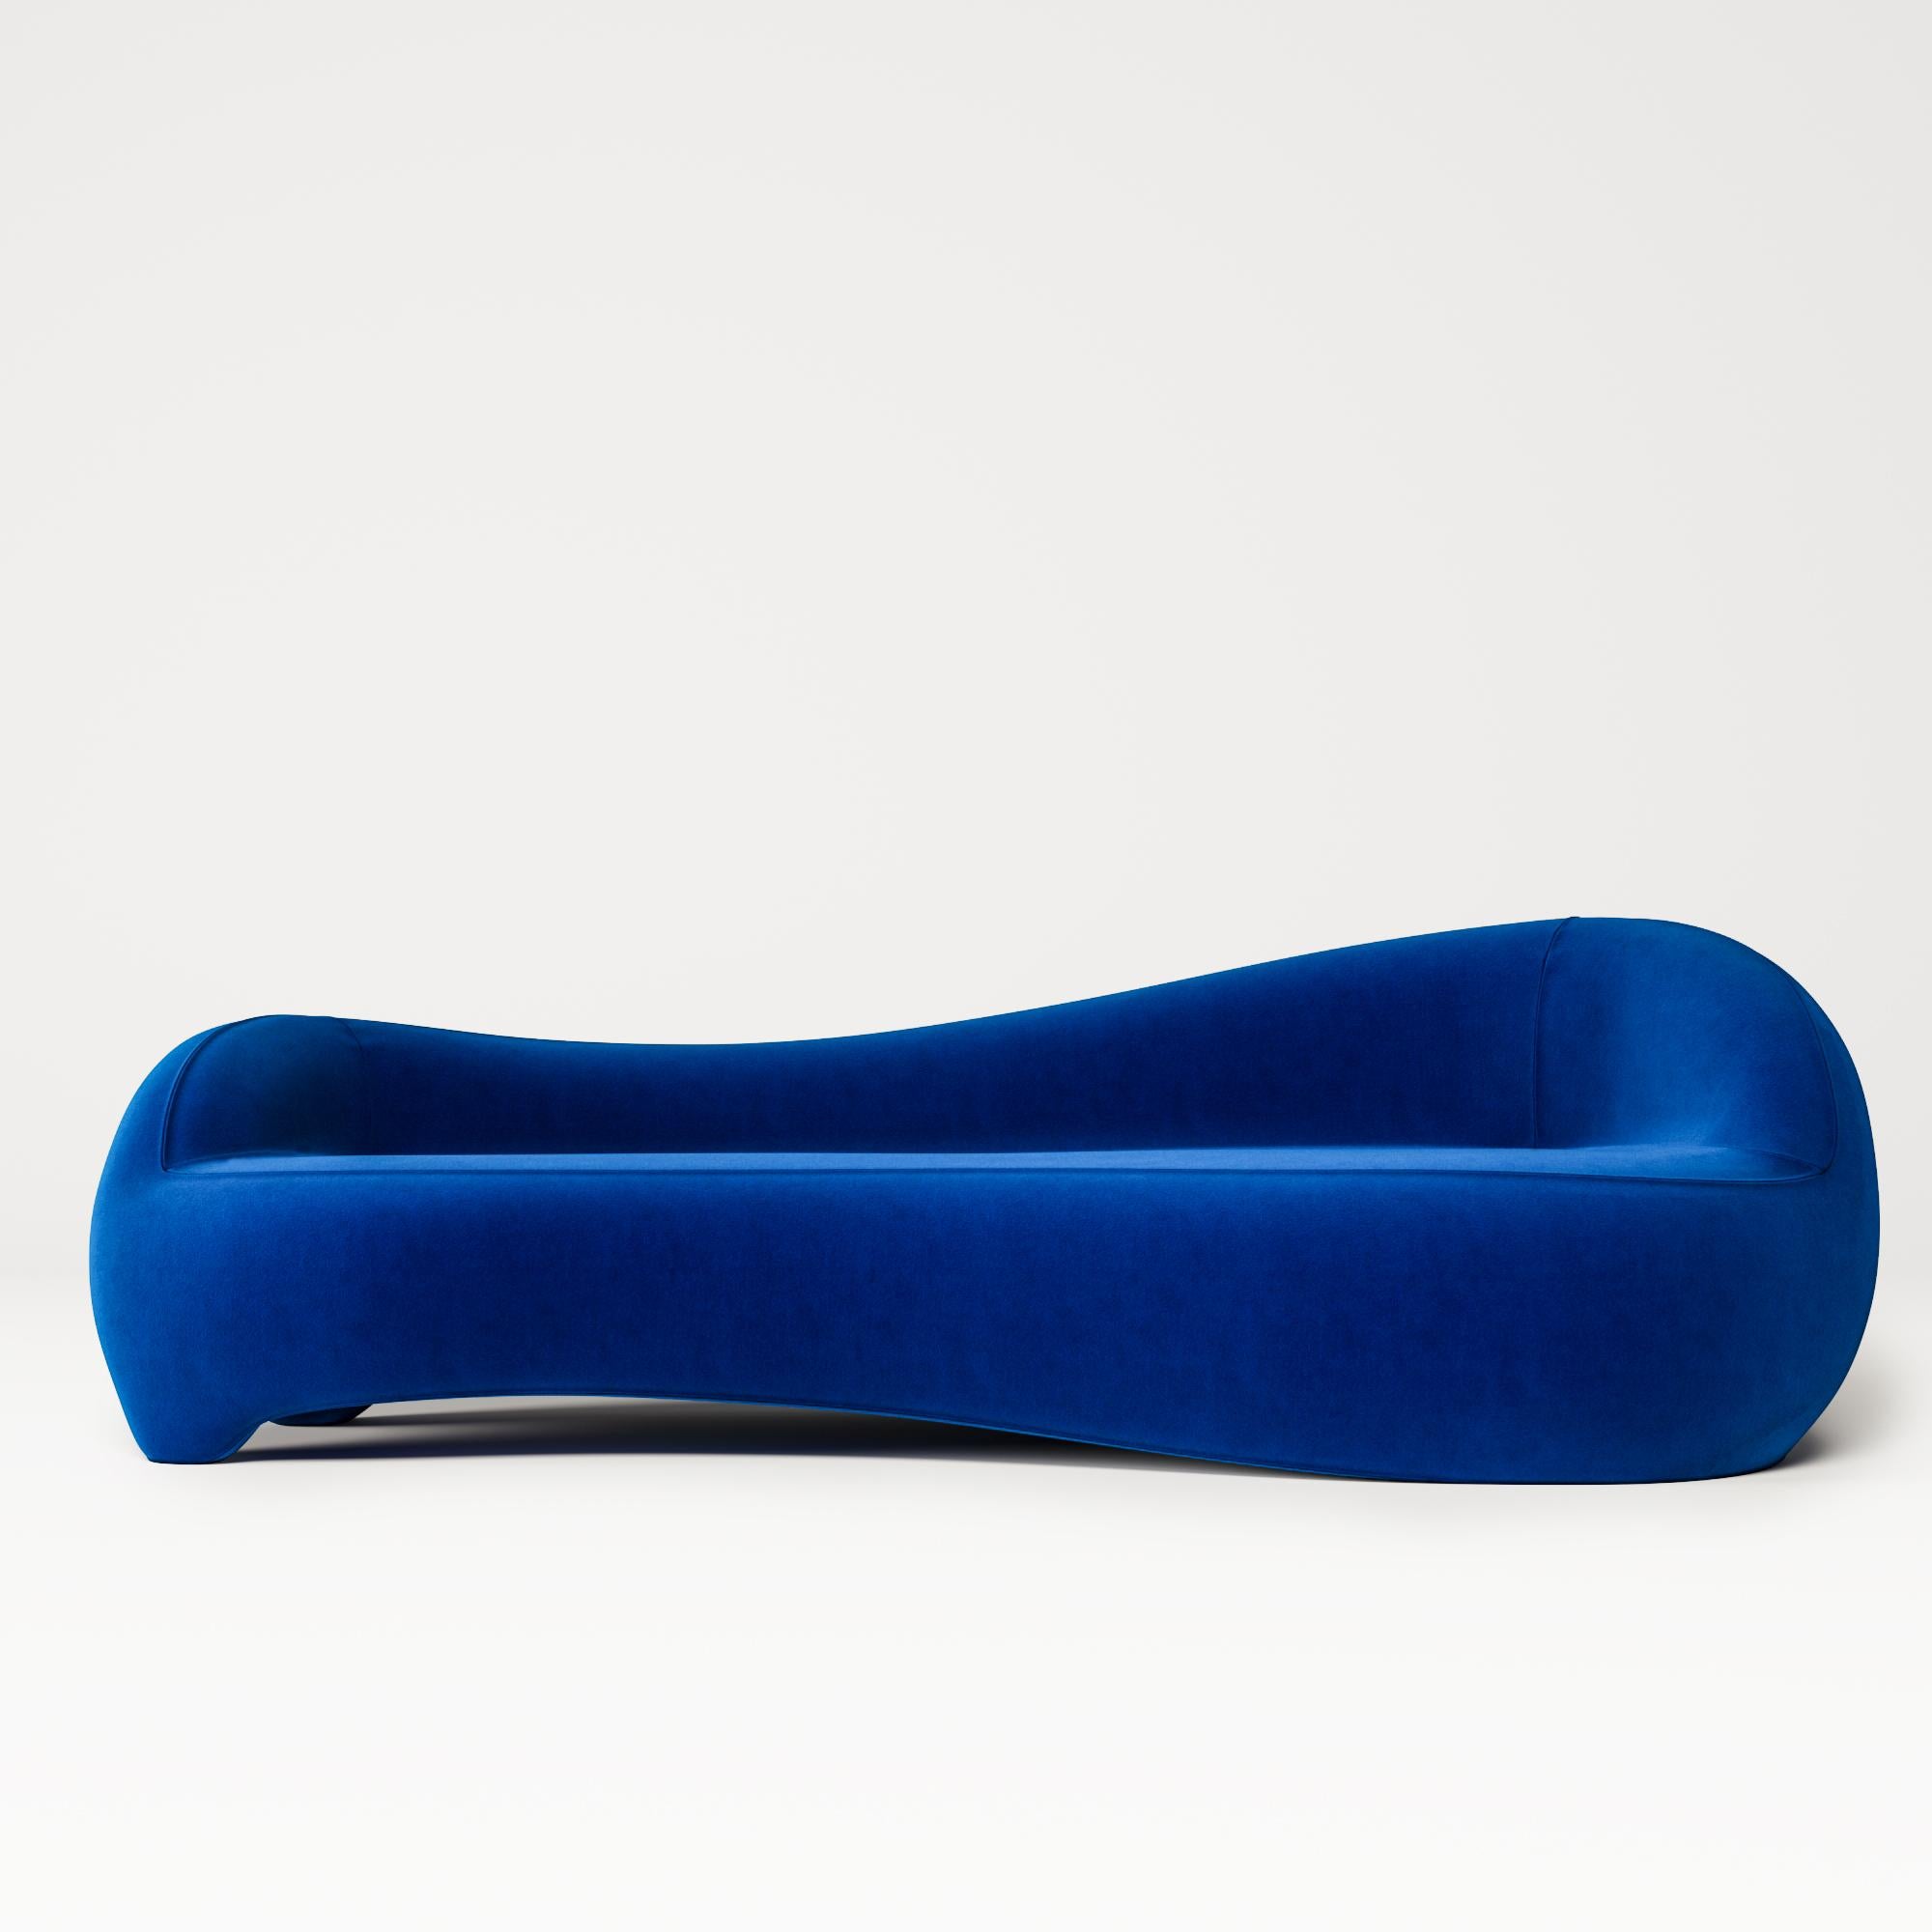 Pal_Up Sofa

Mehmet Orel, who designed the Pal_up sofa, designed as a continuation of the Paloma series, also pays homage to Gaetono Pesce with this design.

While designing the Up series, Pesce made references to the place and bondage of women in